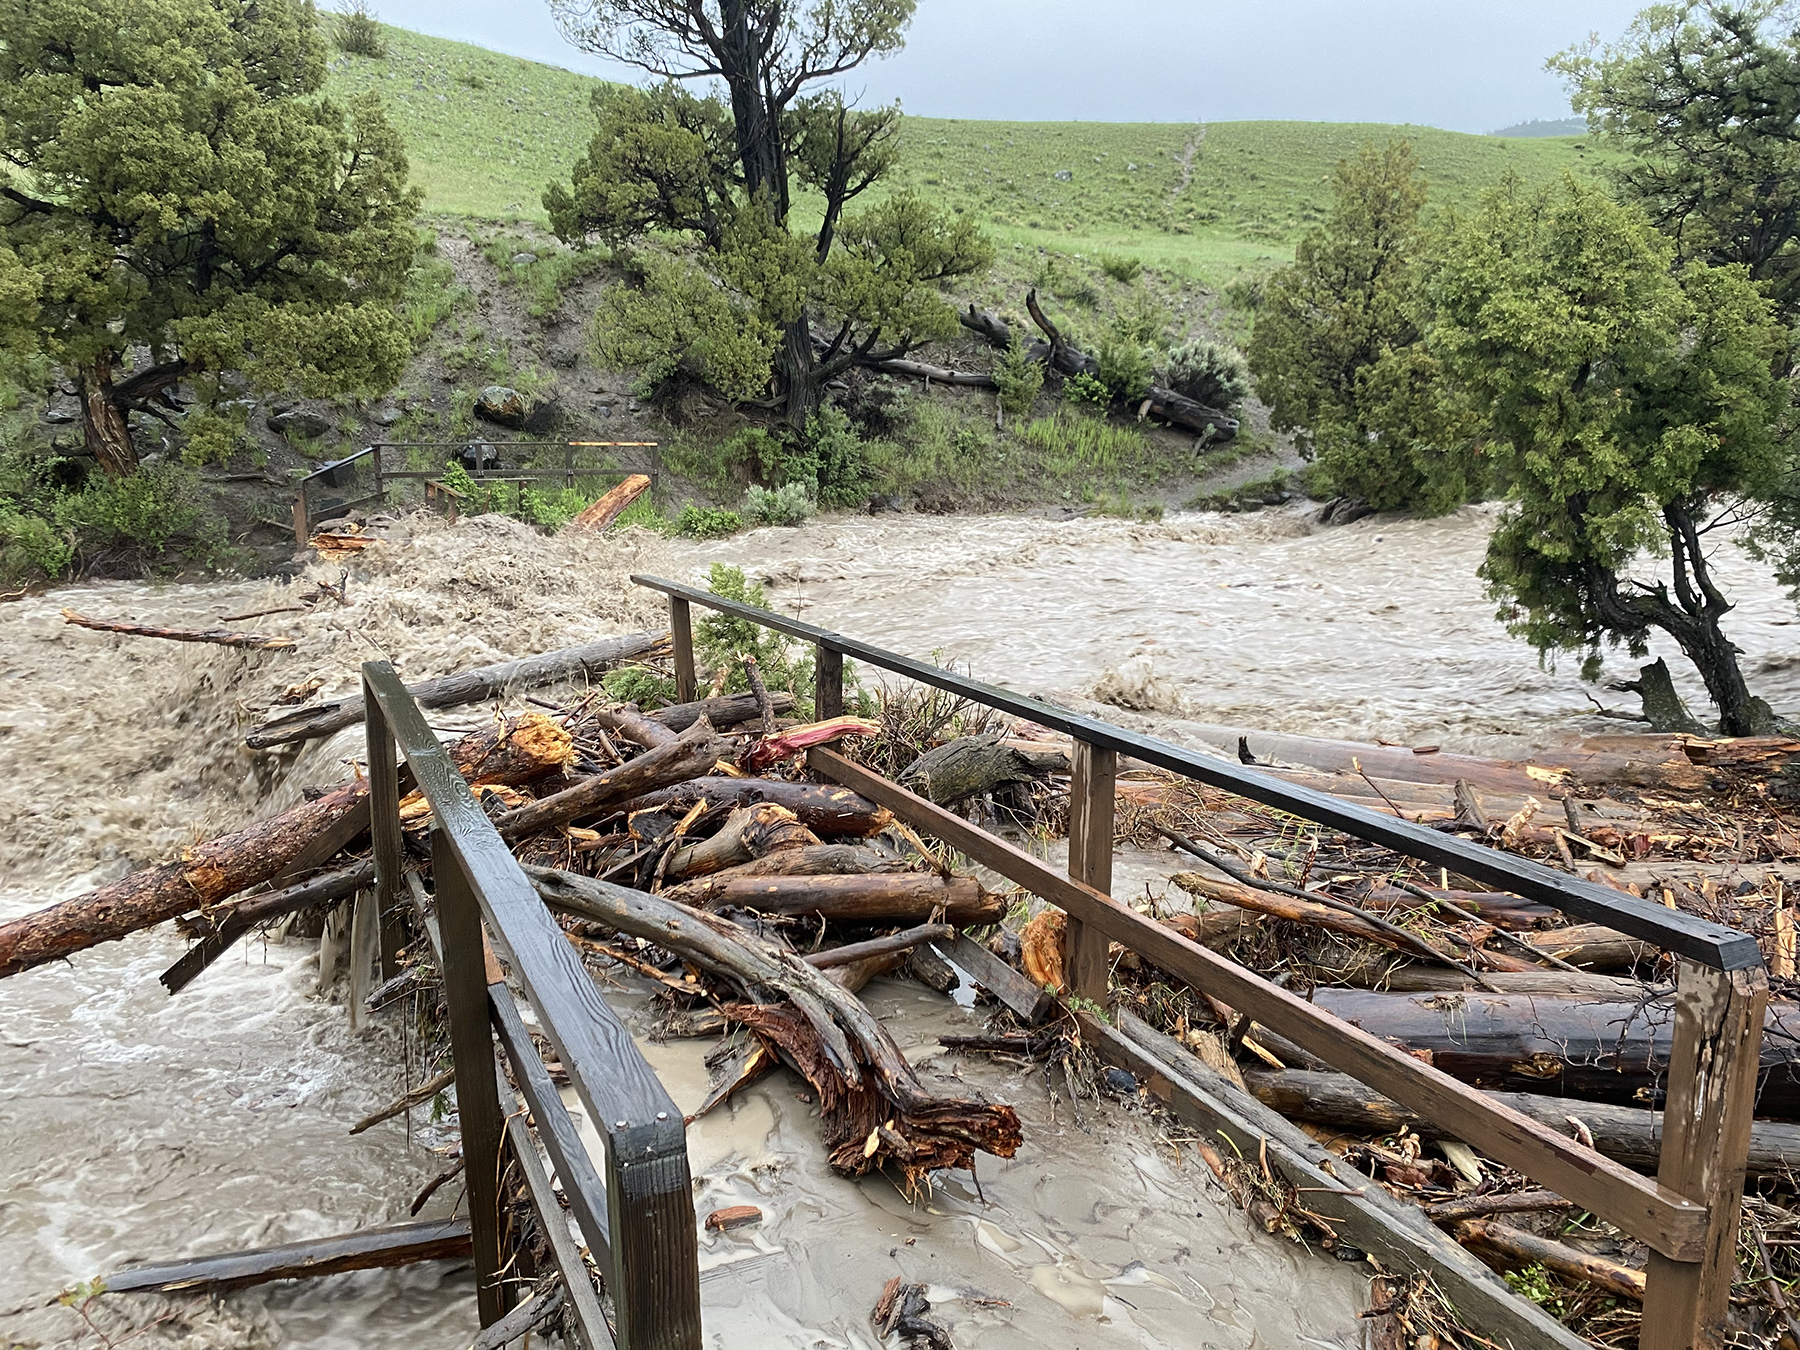 Numerous trails and pedestrian bridges throughout Yellowstone National Park also sustained flood damage. (Photograph courtesy of NPS / Chris Flesch)